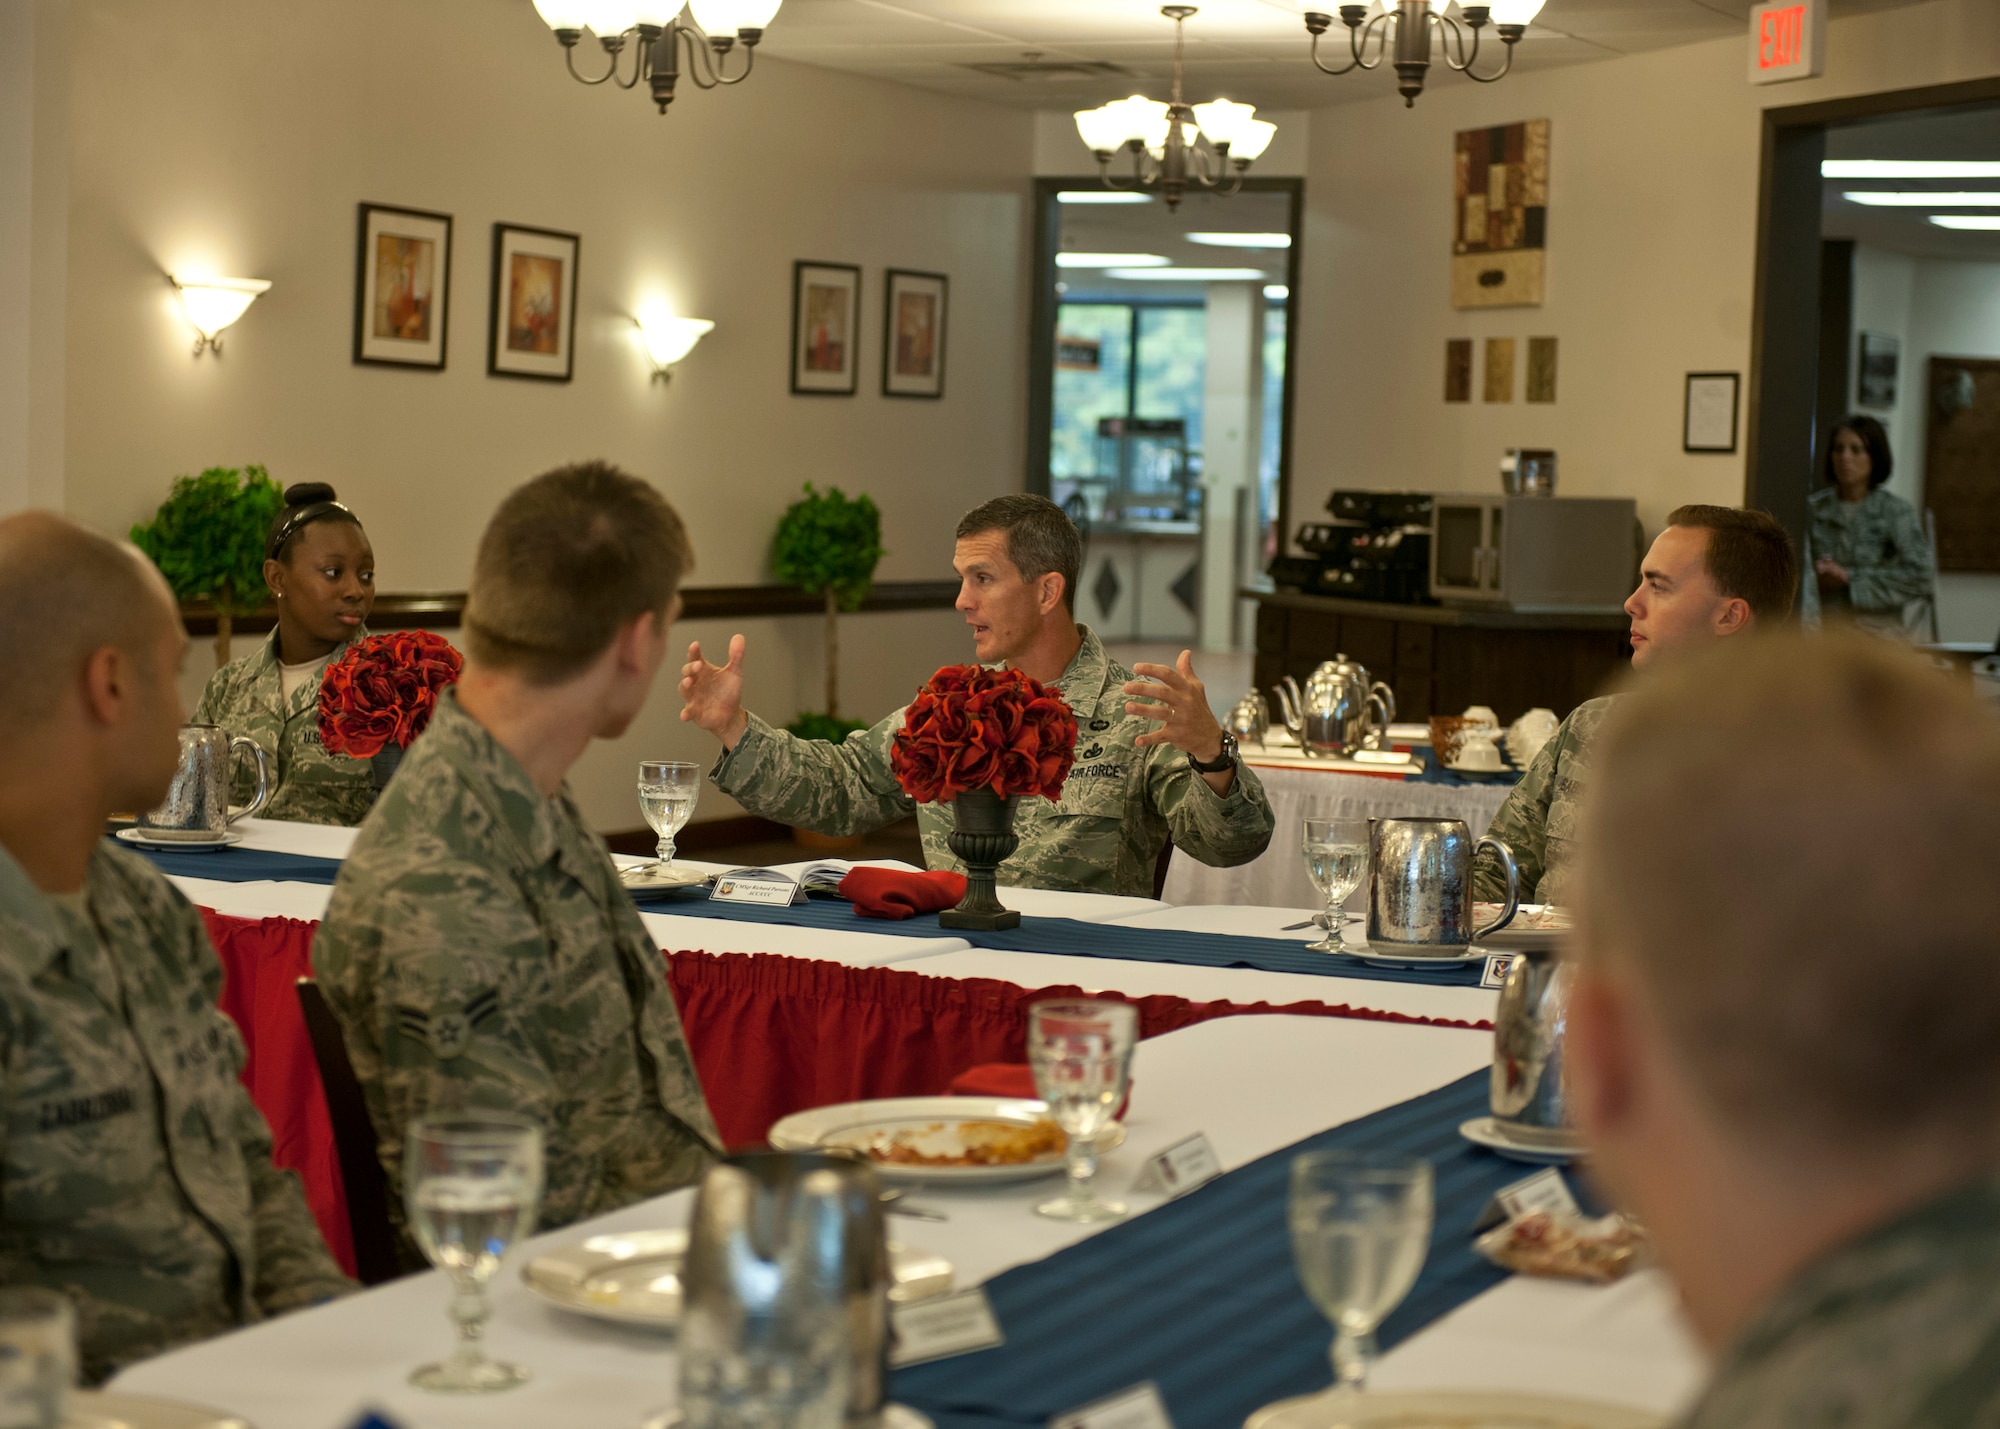 U.S. Air Force Chief Master Sgt. Rick Parsons, command chief of Air Combat Command, speaks with Airmen during breakfast at the Georgia Pines Dining Facility Aug. 1, 2012, at Moody Air Force Base, Ga. Parsons met with the Airmen to discuss some of the Air Force’s goals for the next few years and to answer any questions they had. (U.S. Air Force photo by Senior Airman Eileen Meier/Released) 